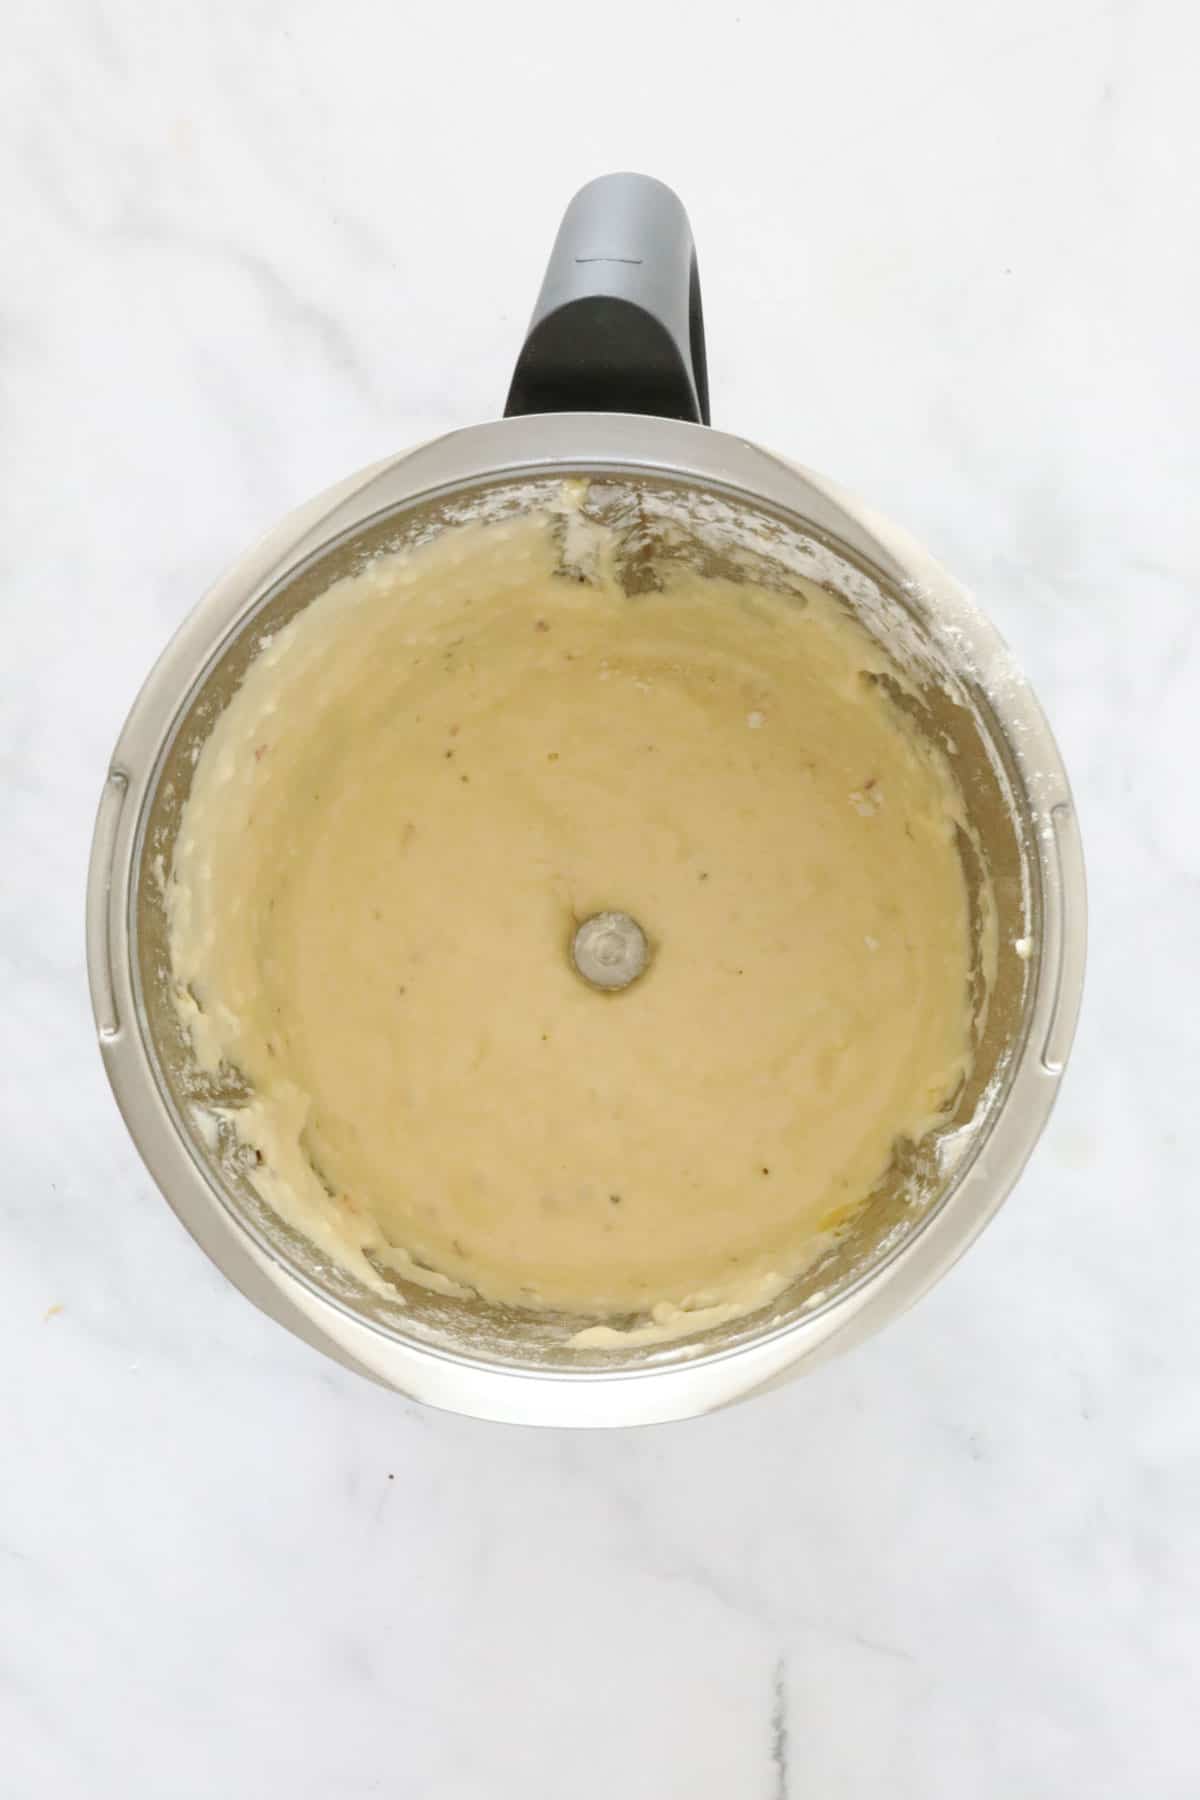 Pikelet batter in a Thermomix.